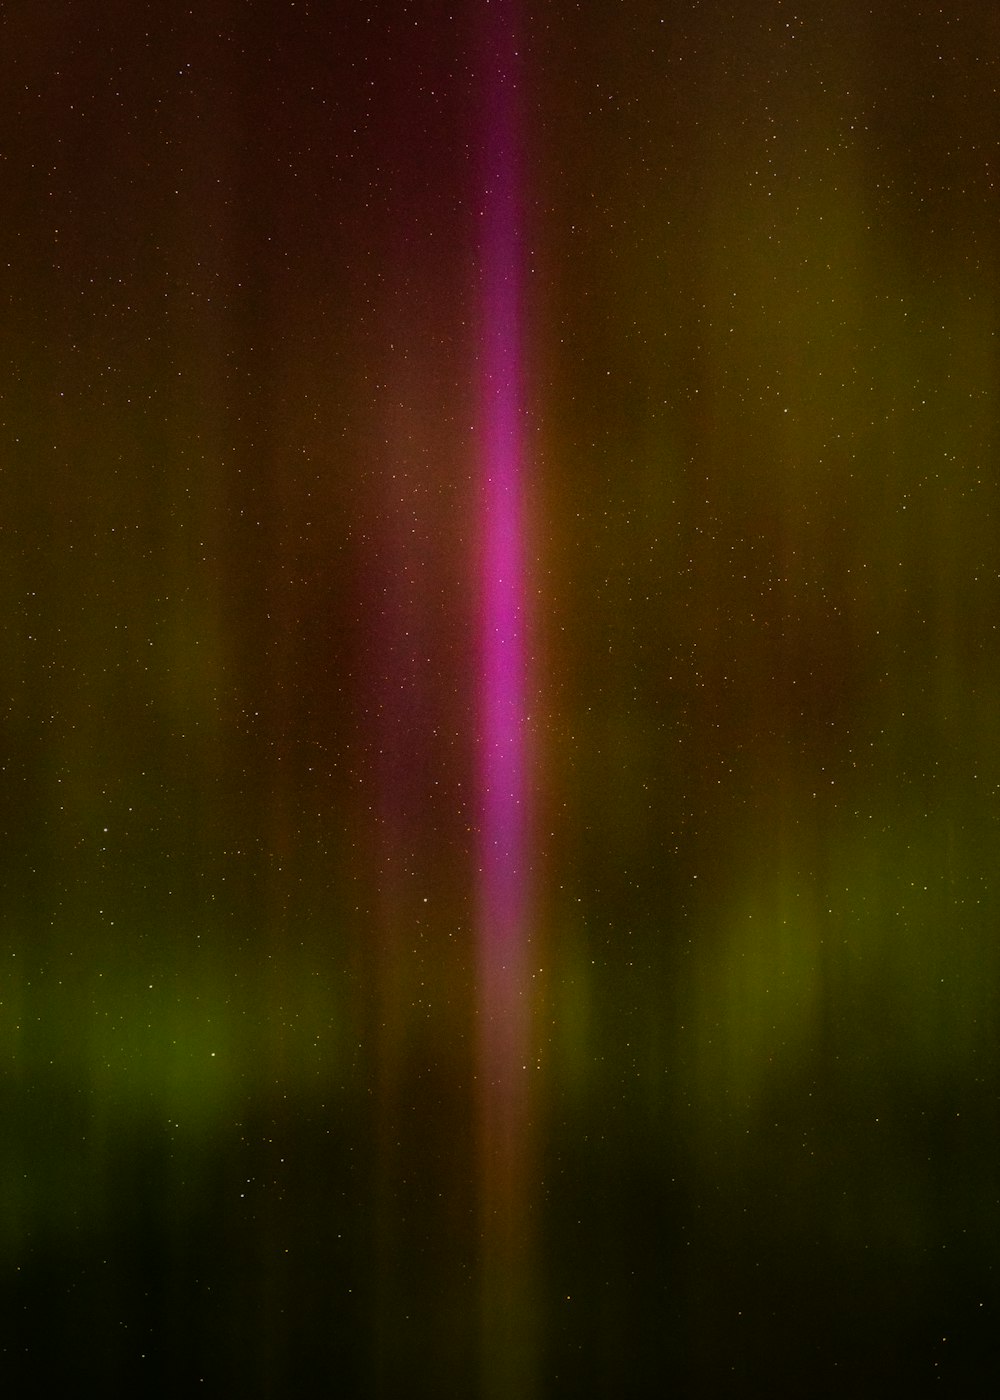 a blurry image of a pink and green light